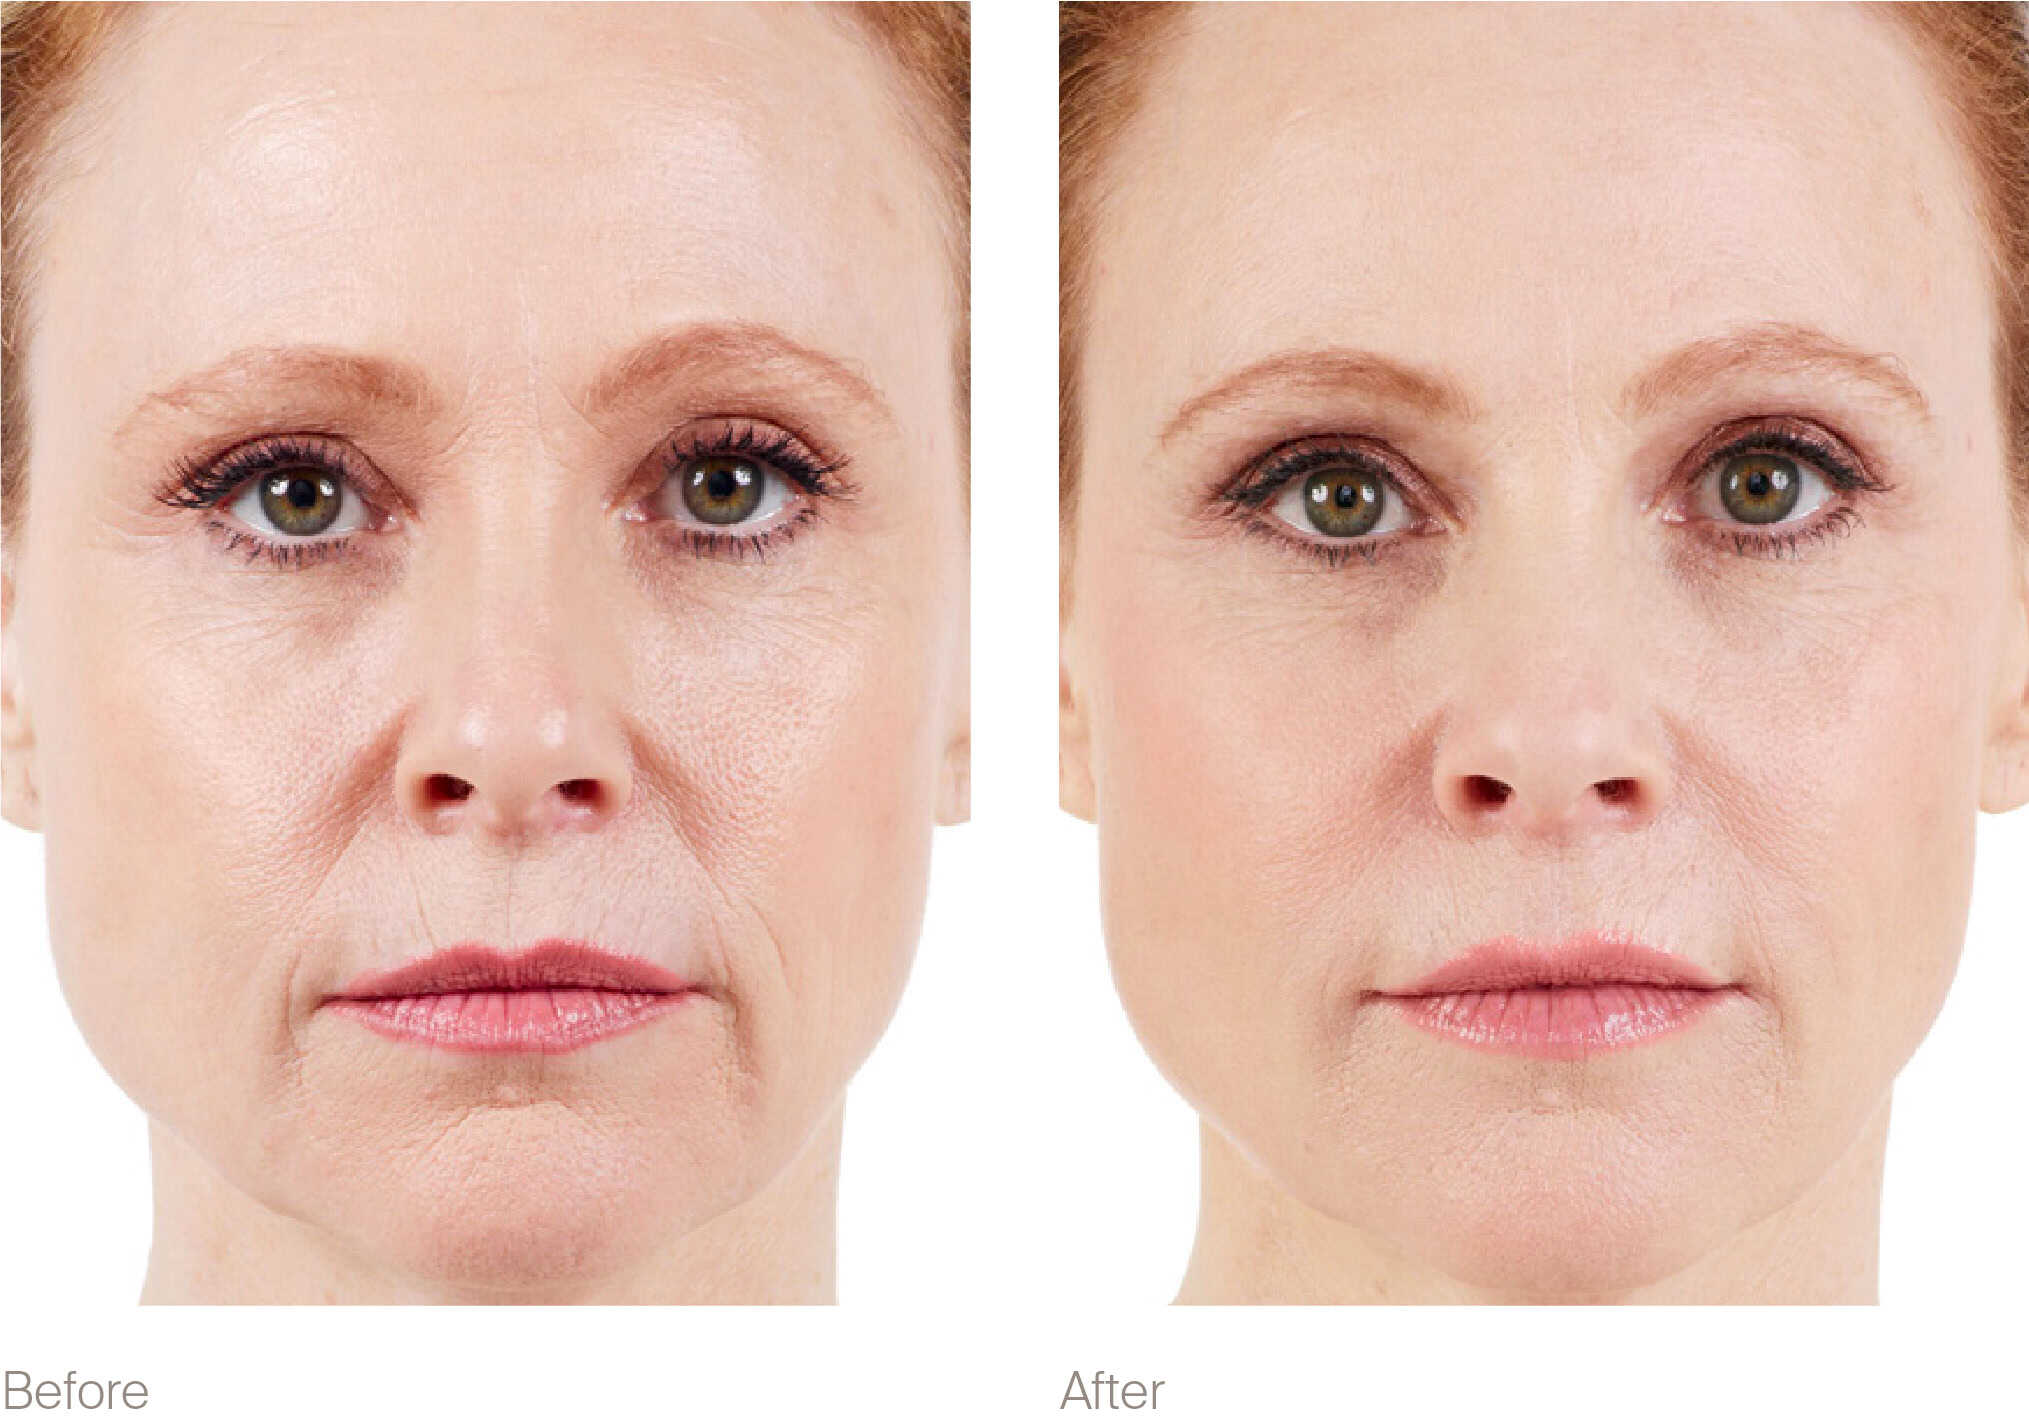 Before and after photos show improvements from a dermal filler application on a woman's face